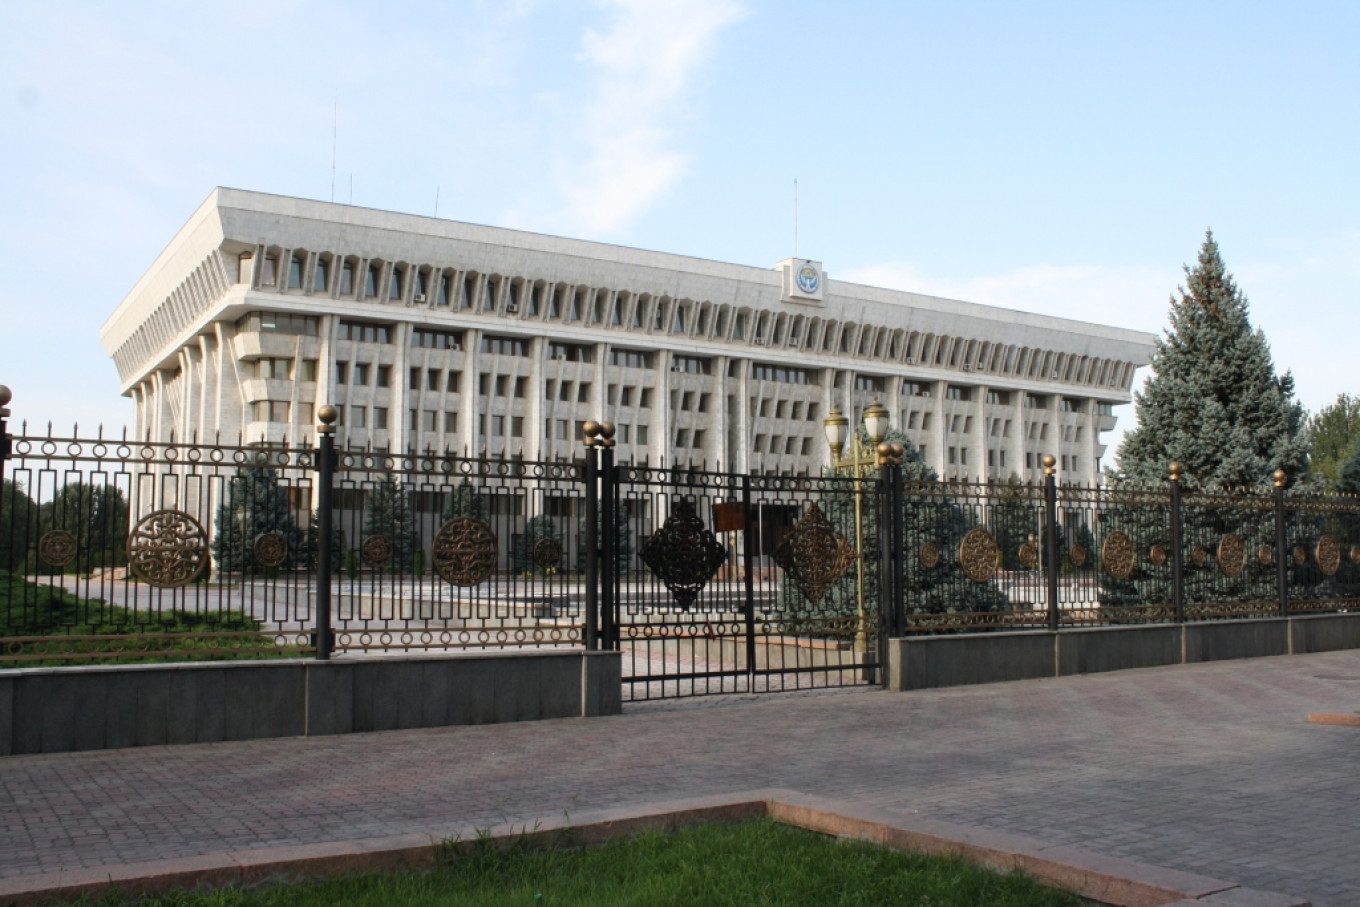 Kyrgyzstan Tears Down Government Gates in Symbolic Move After Crisis